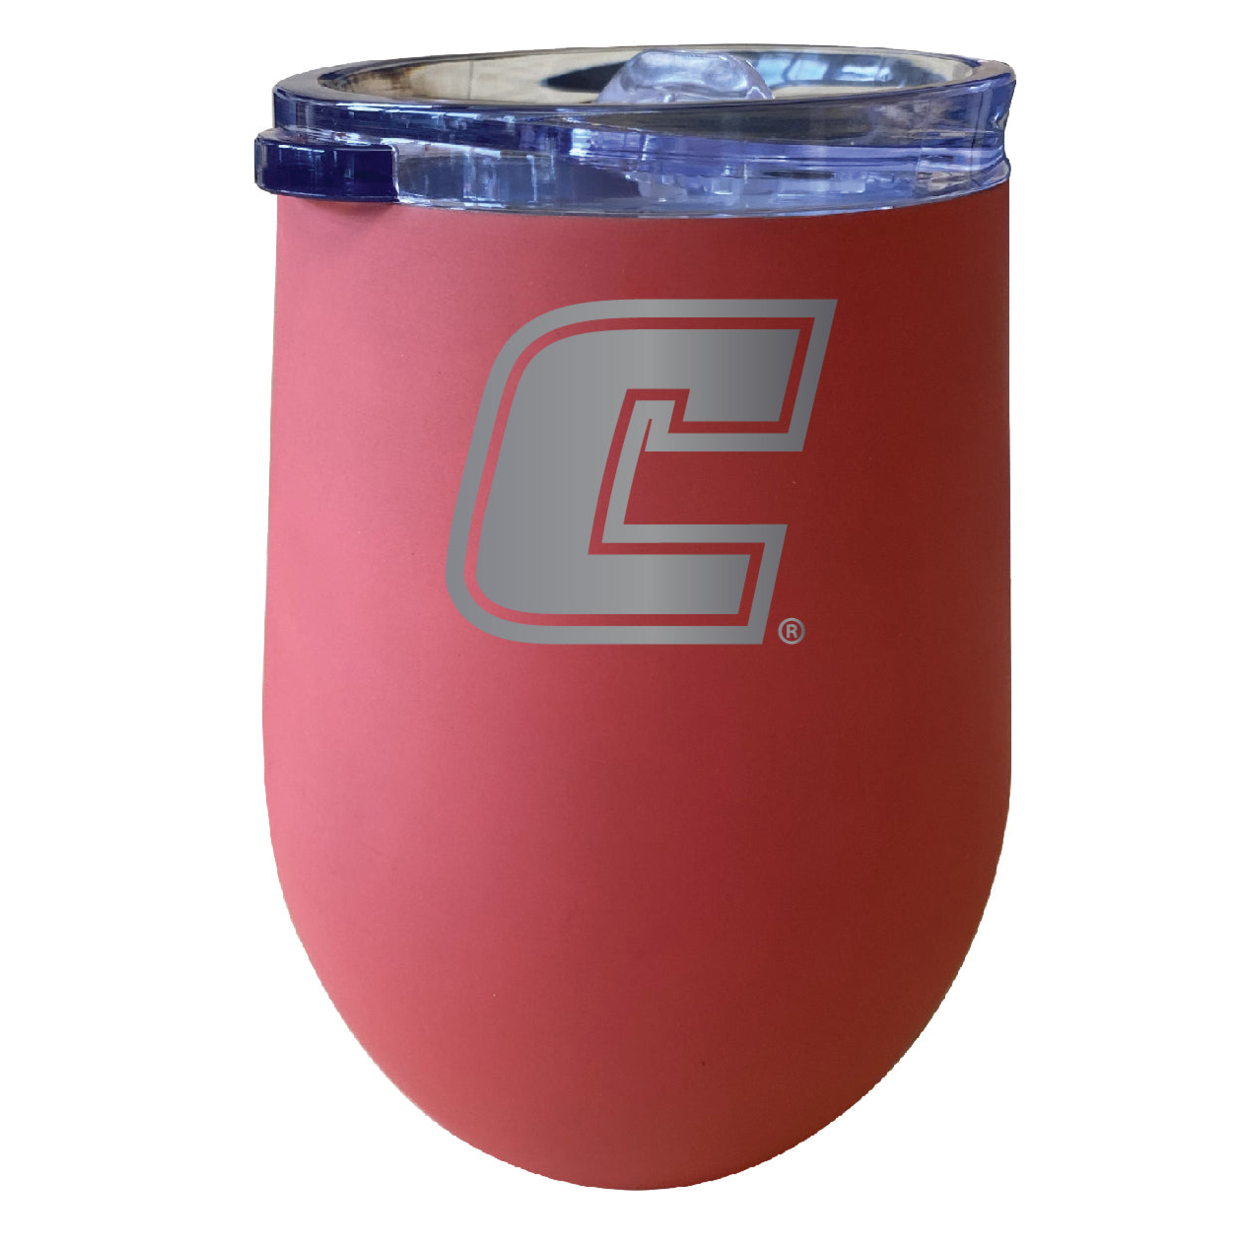 University Of Tennessee At Chattanooga 12 Oz Etched Insulated Wine Stainless Steel Tumbler - Choose Your Color - Coral